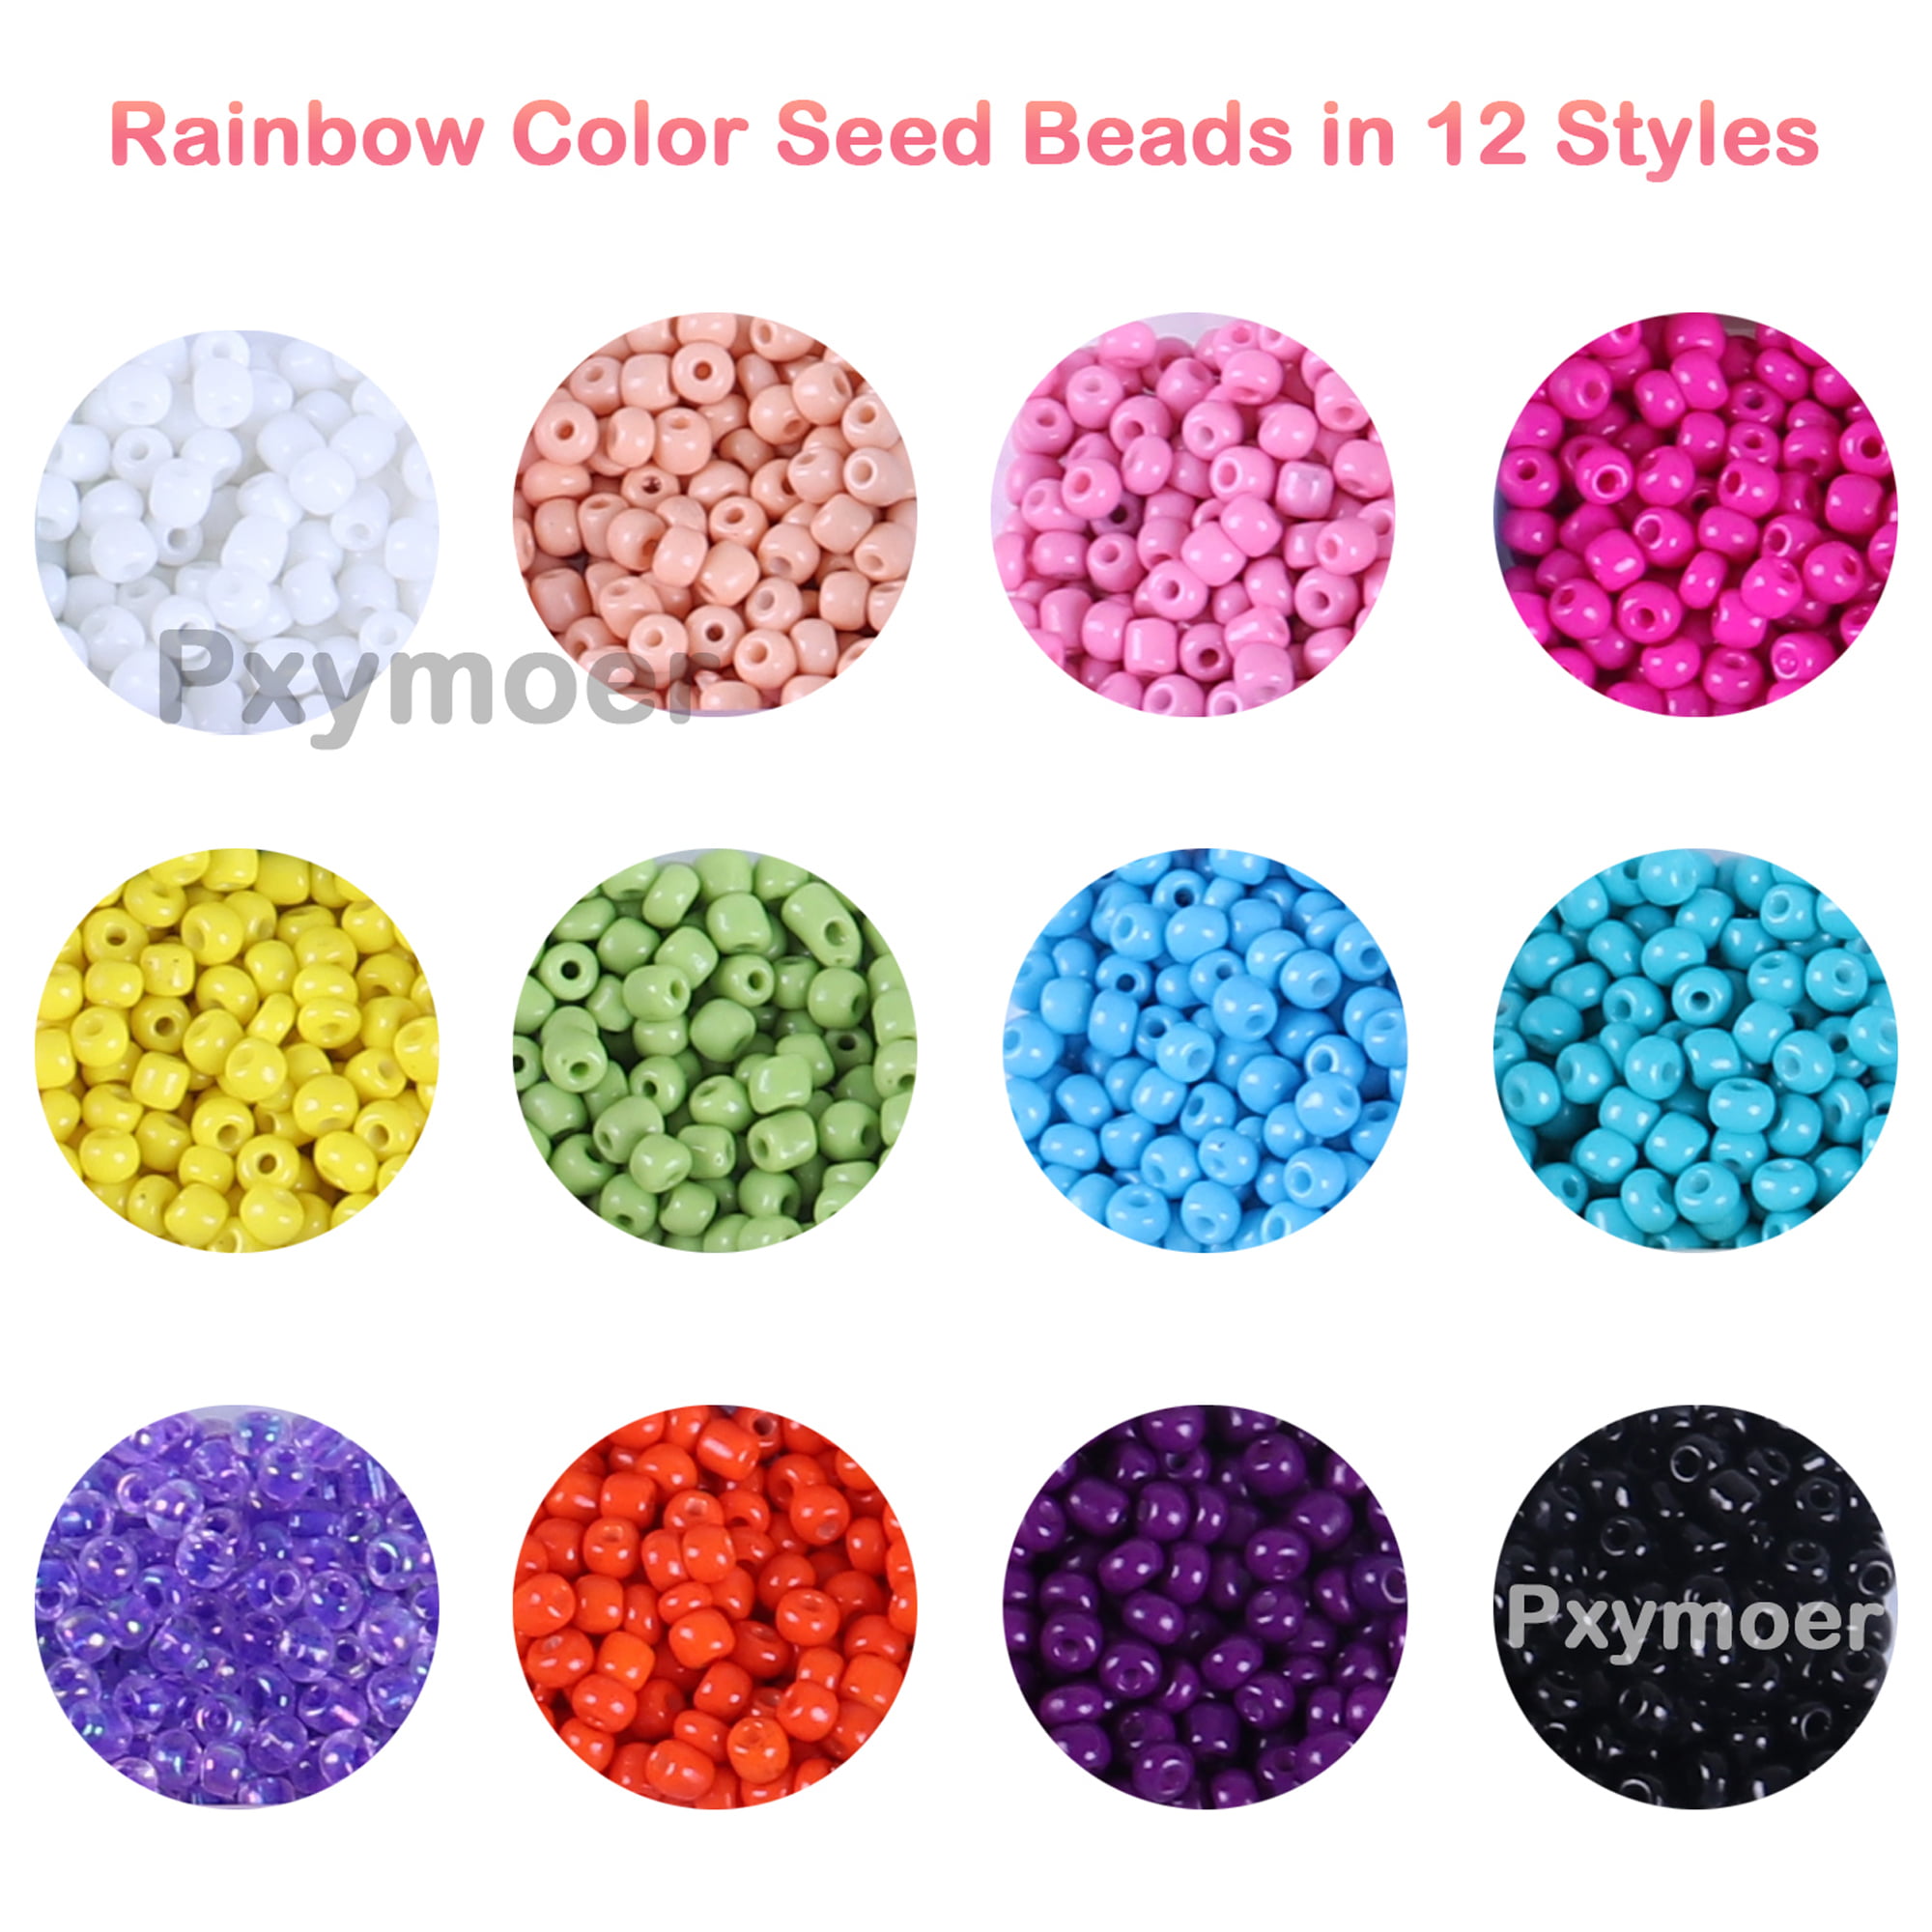 2600PCS 4mm Glass Seed Beads Bracelets Making Kit，600pcs Alphabet Letter  Beads for Jewelry Making and Crafts with Elastic String Cords，extended  chain